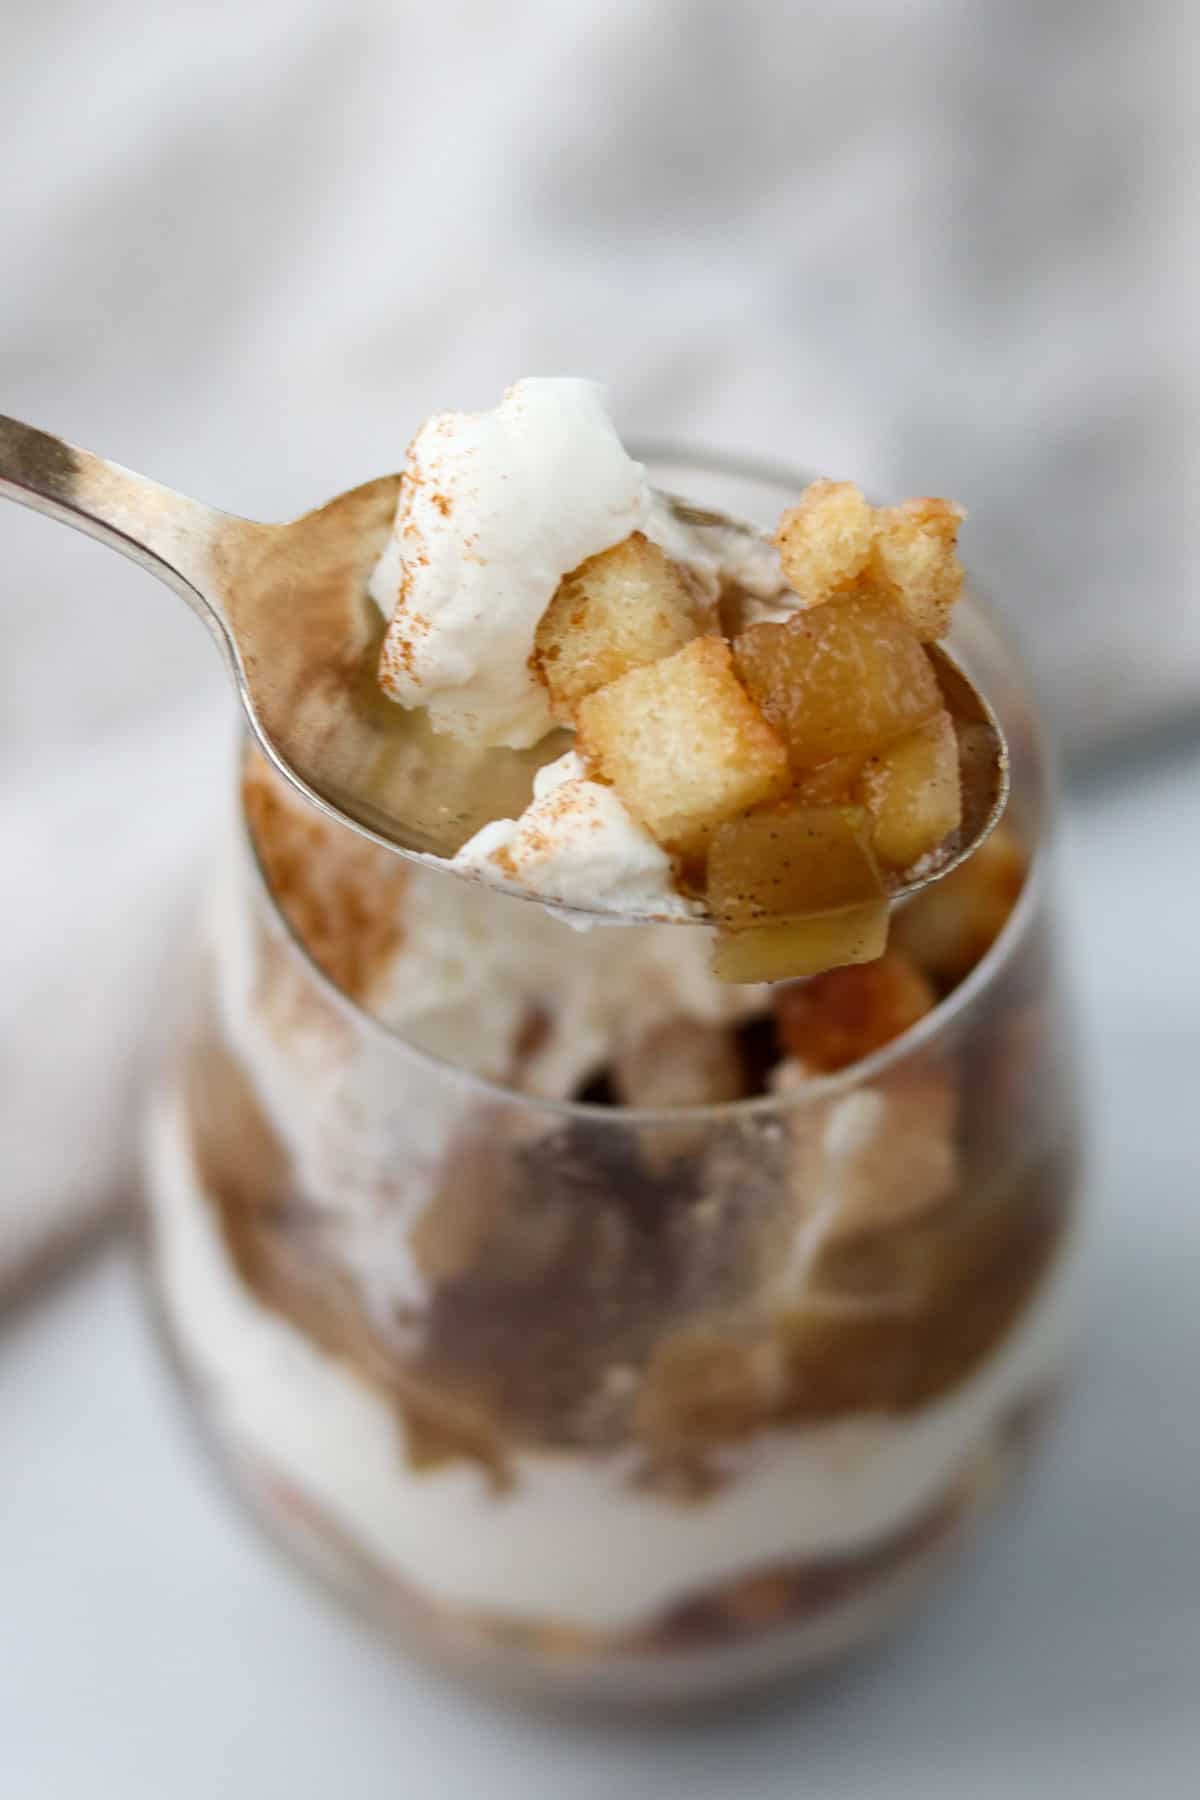 Spoonful of apple trifle.